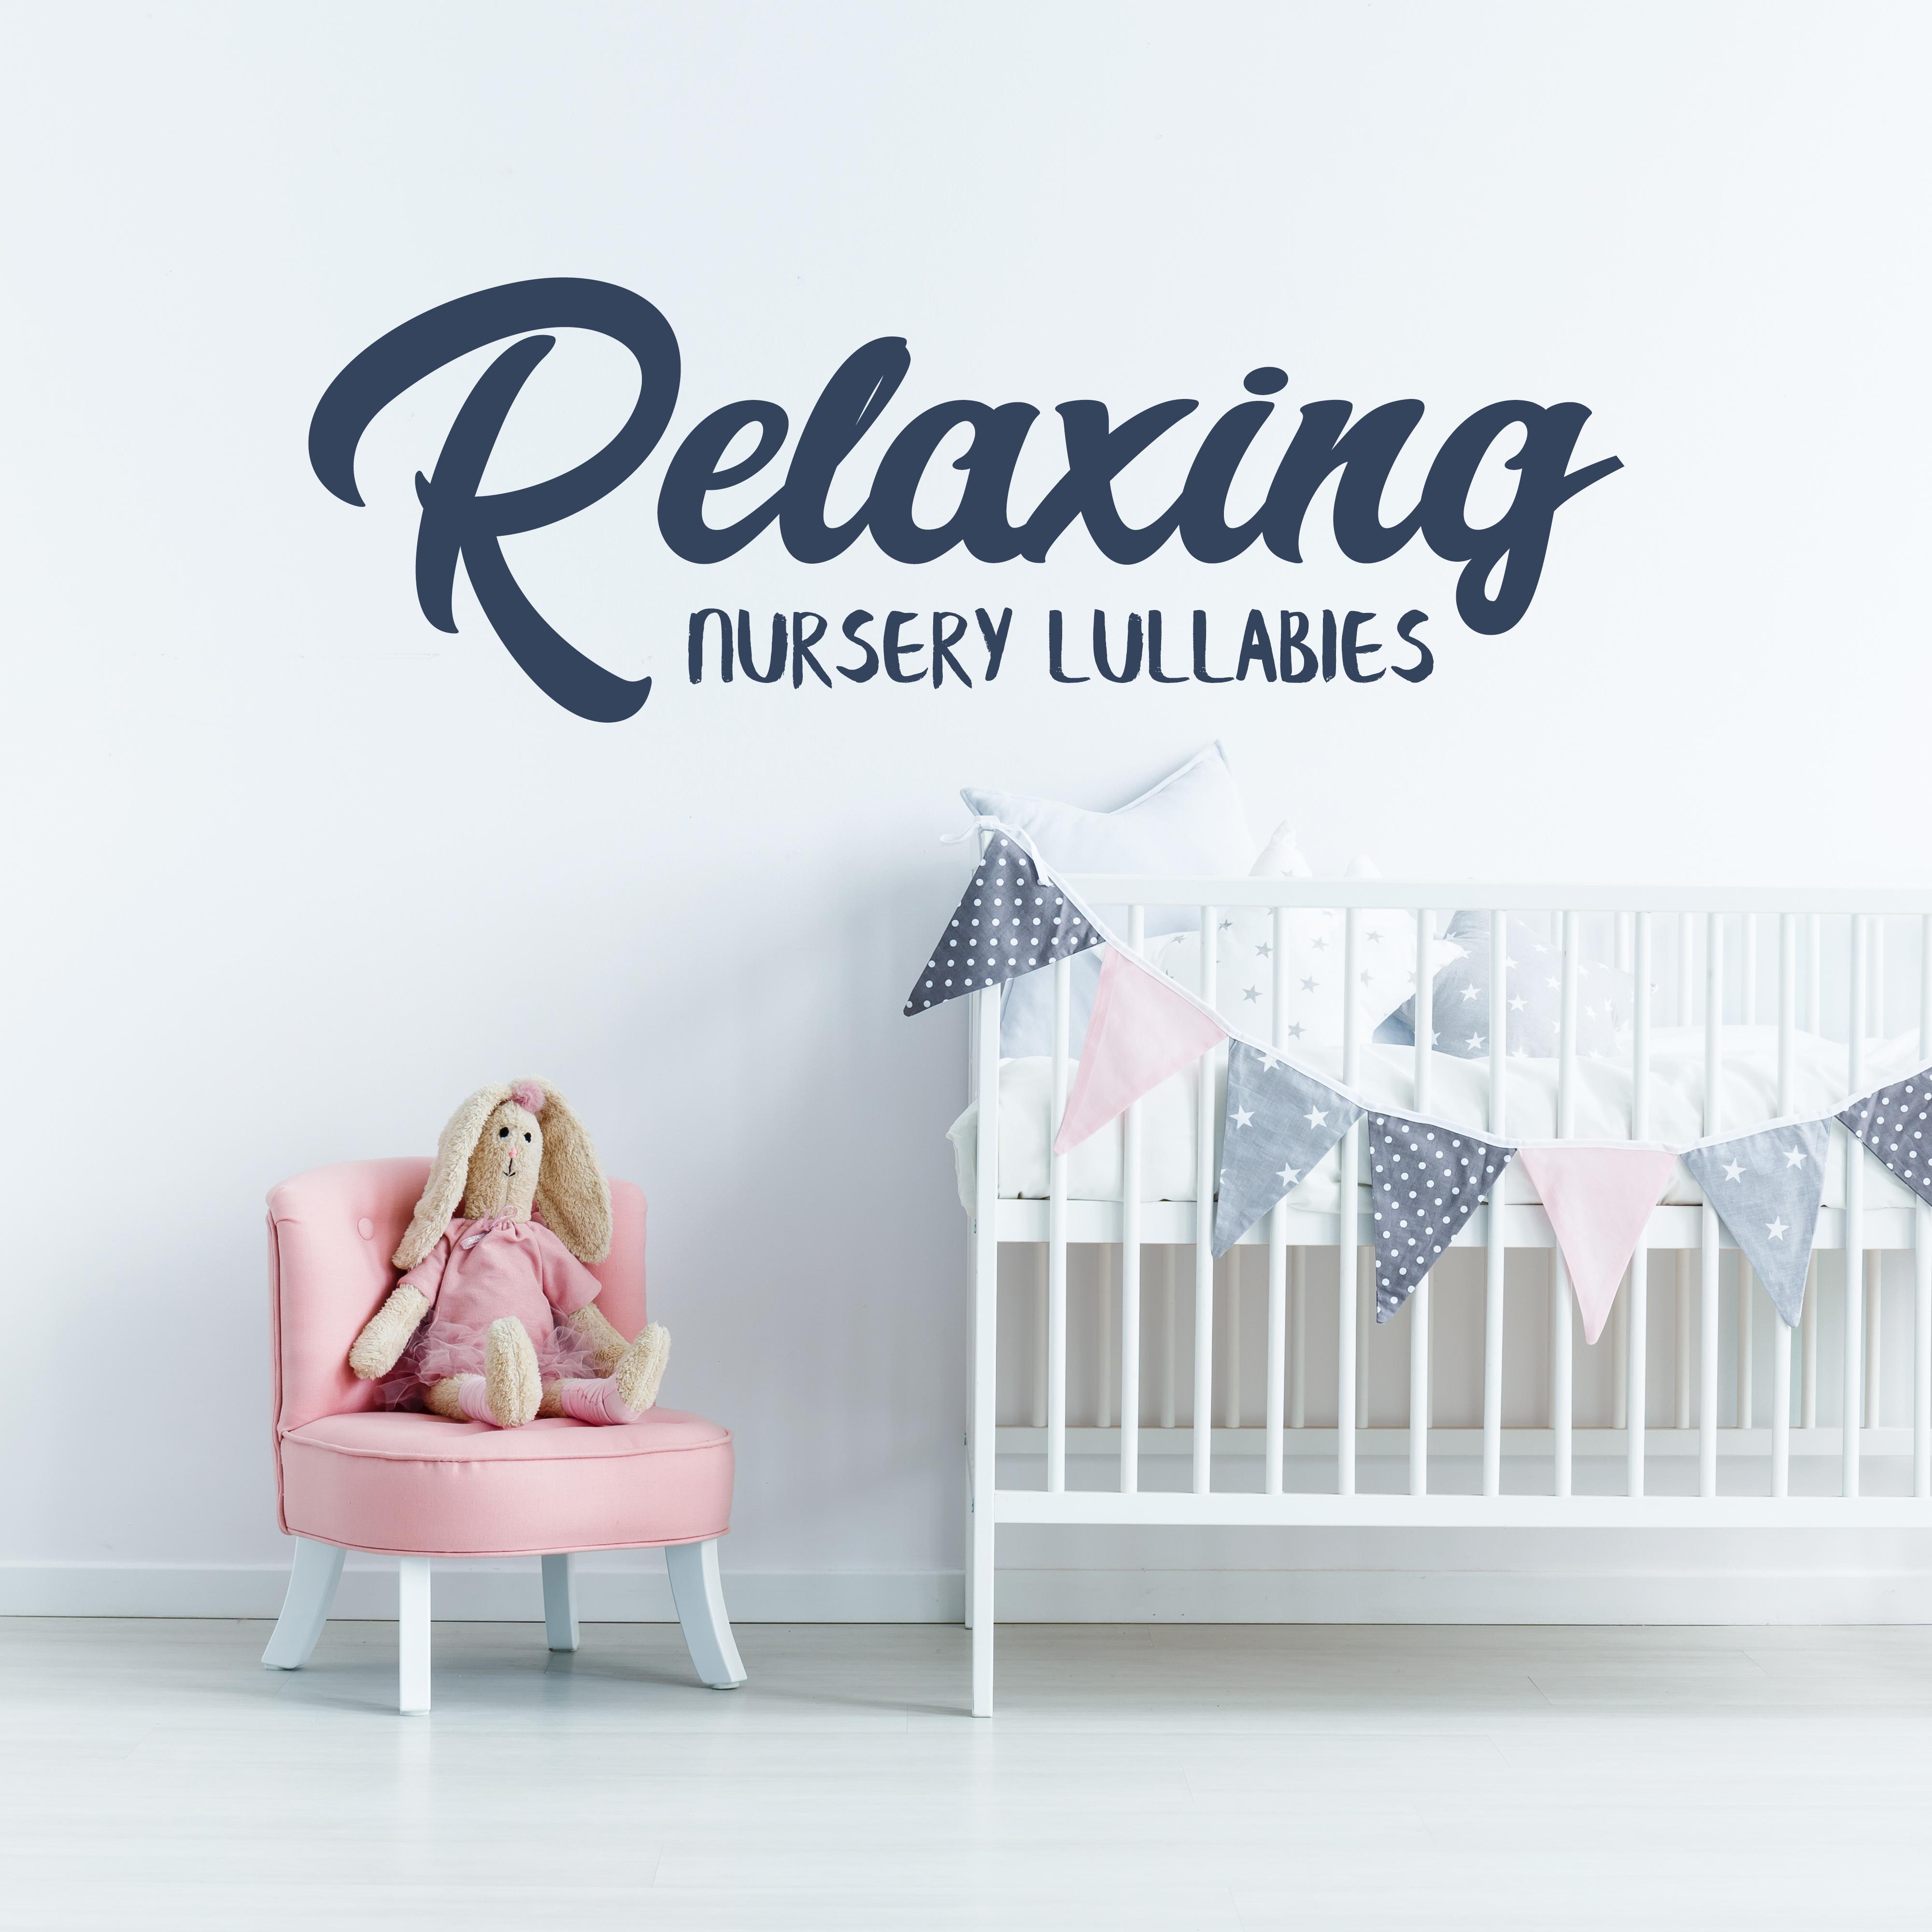 Relaxing Nursery Lullabies  Peaceful Sounds for Baby, Soothing Lullabies, Bedtime Baby, Reduce Stress, Sweet Tunes for Kids